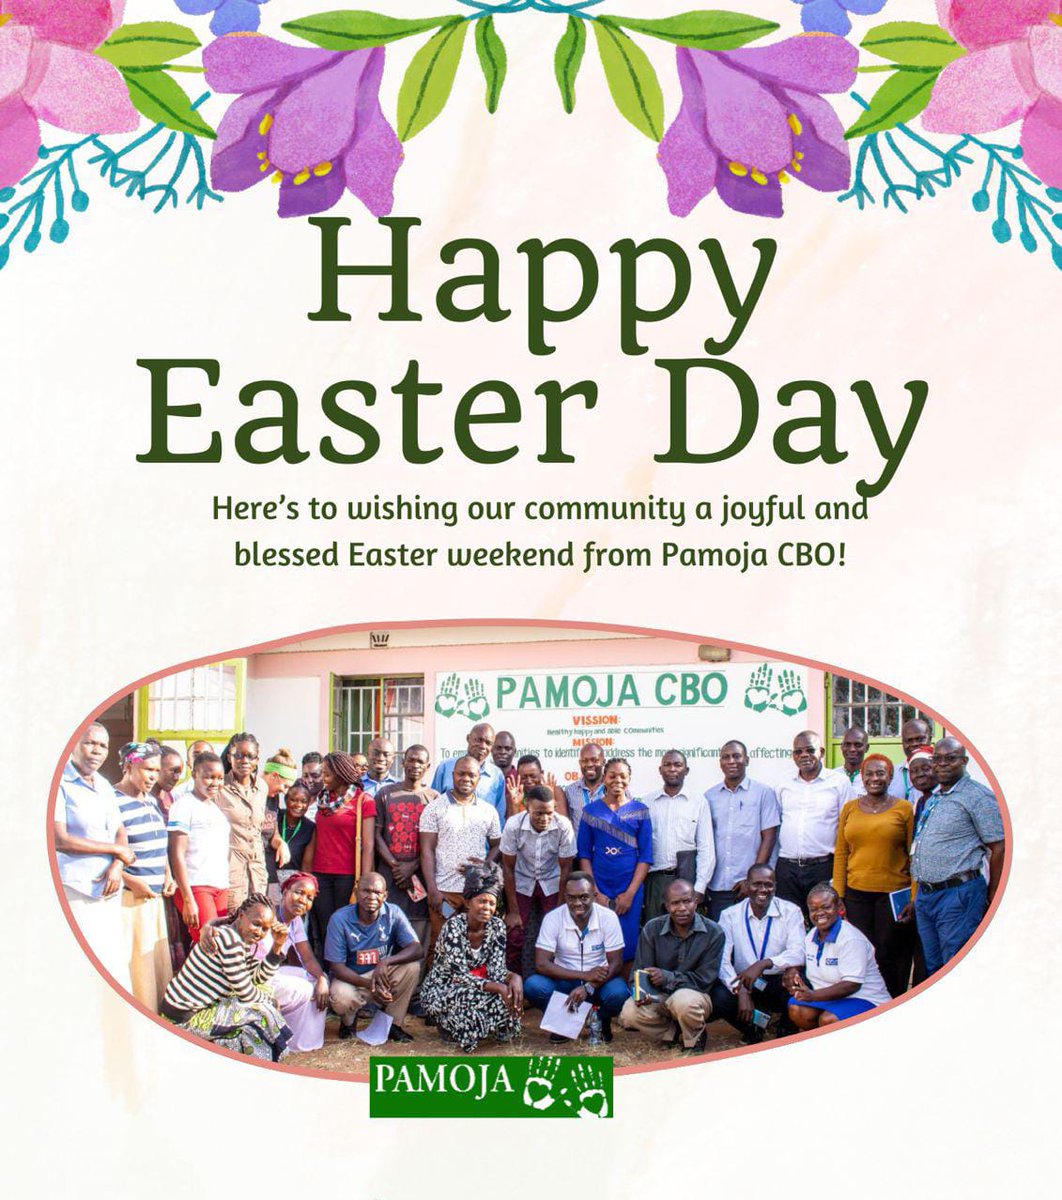 Wishing you a happy Easter